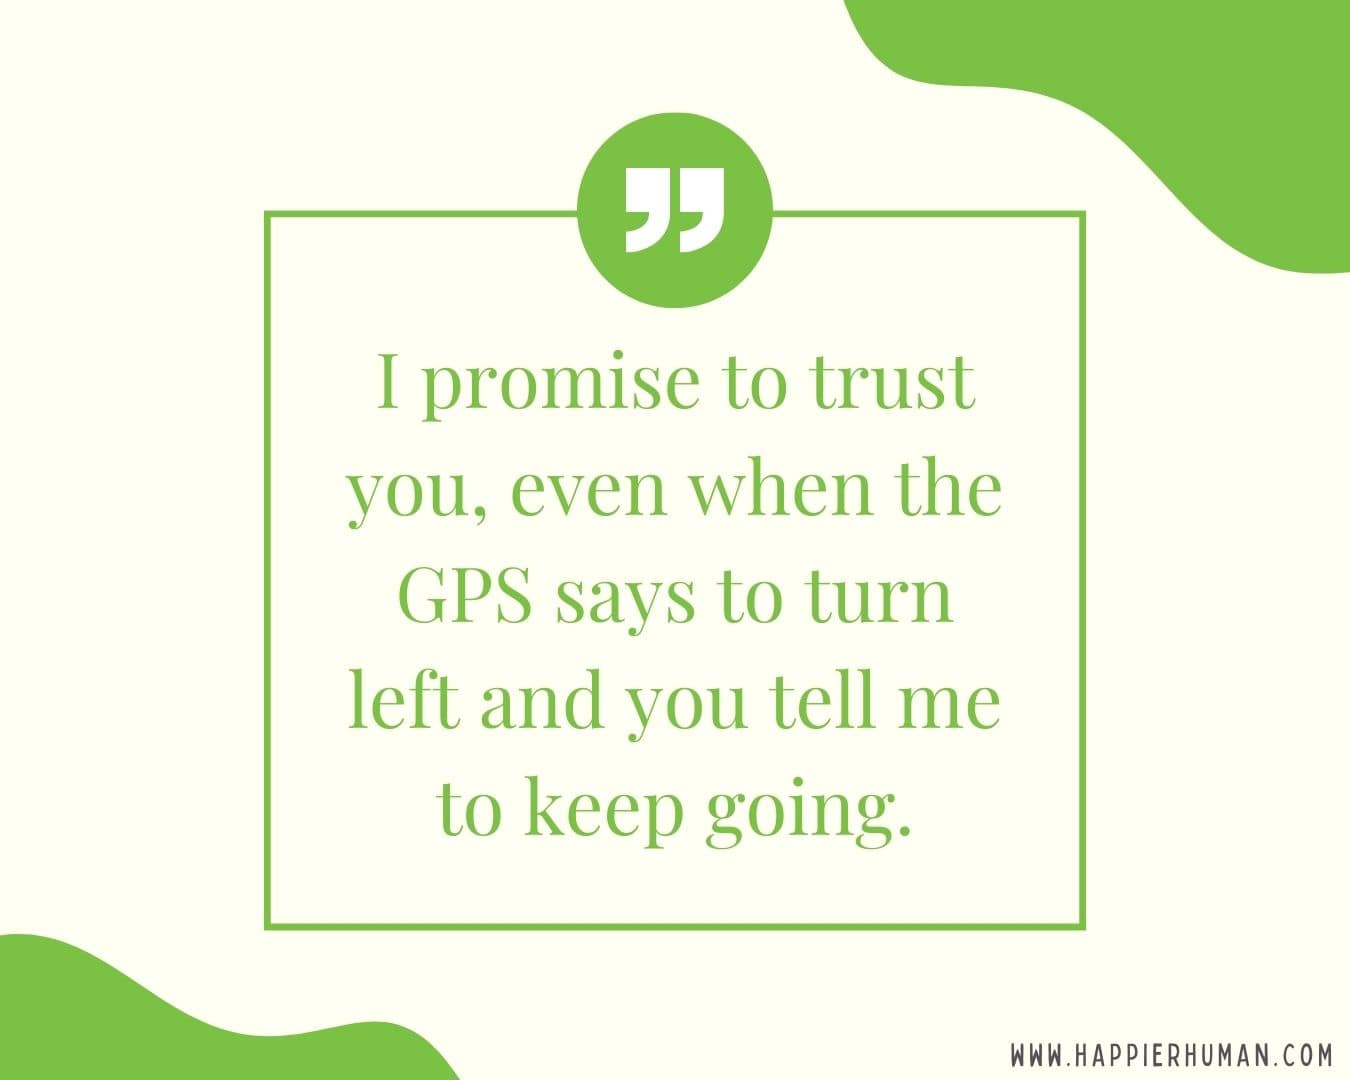 I’m Here for You Quotes - “I promise to trust you, even when the GPS says to turn left and you tell me to keep going.”